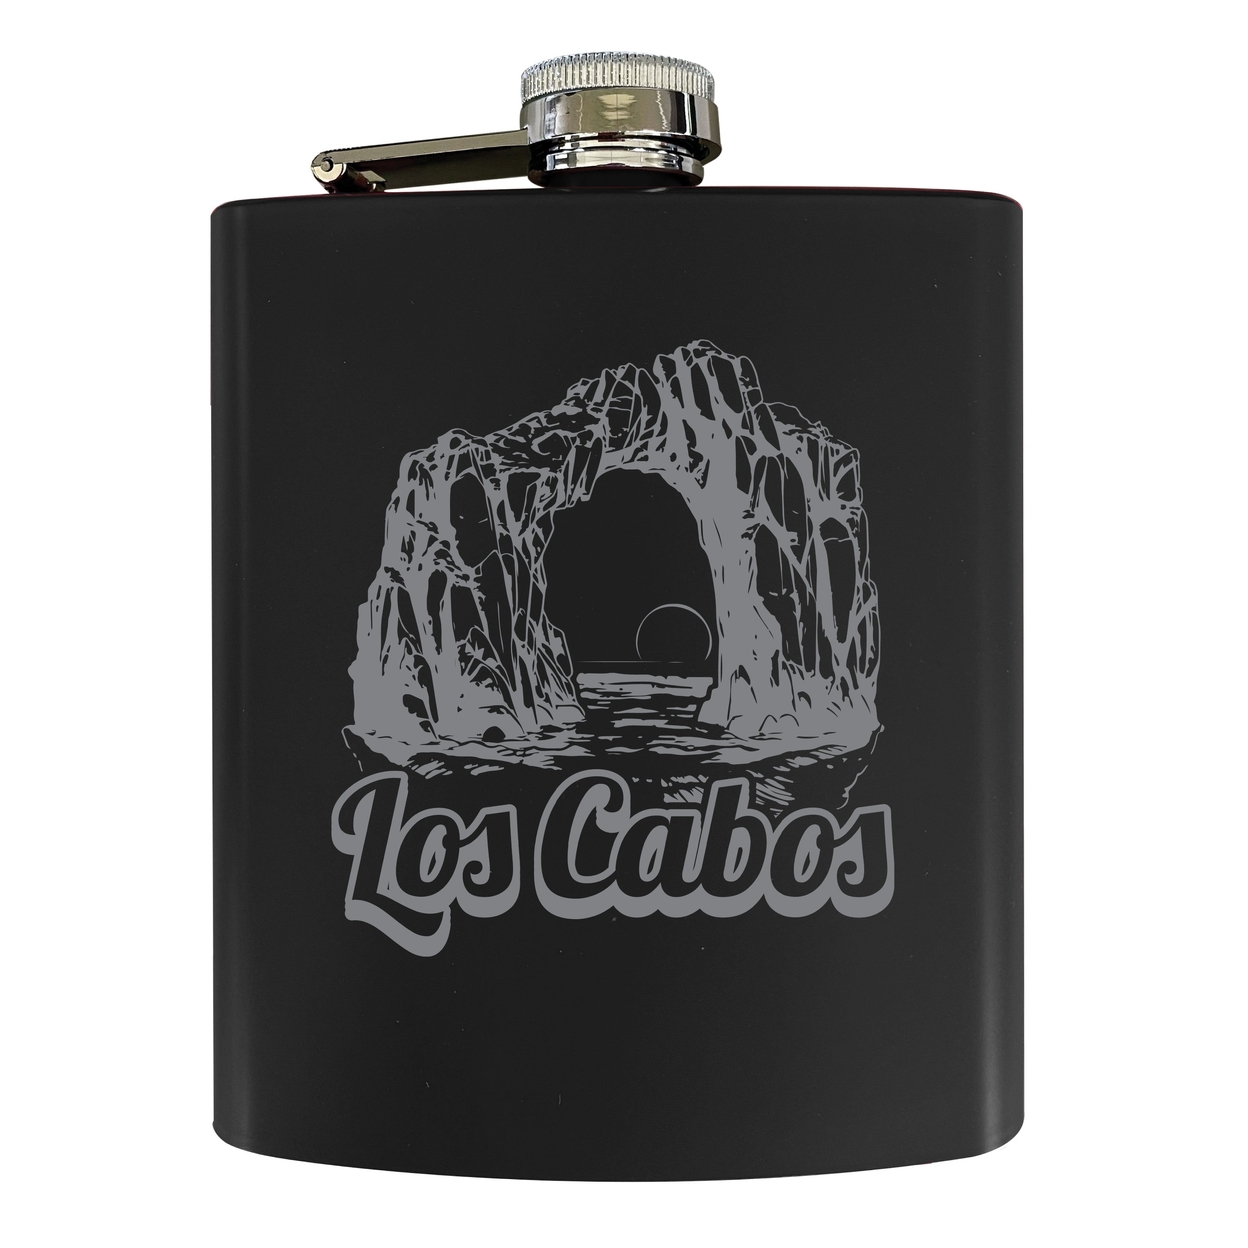 Los Cabos Mexico Souvenir 7 Oz Engraved Steel Flask Matte Finish - Red,,4-Pack